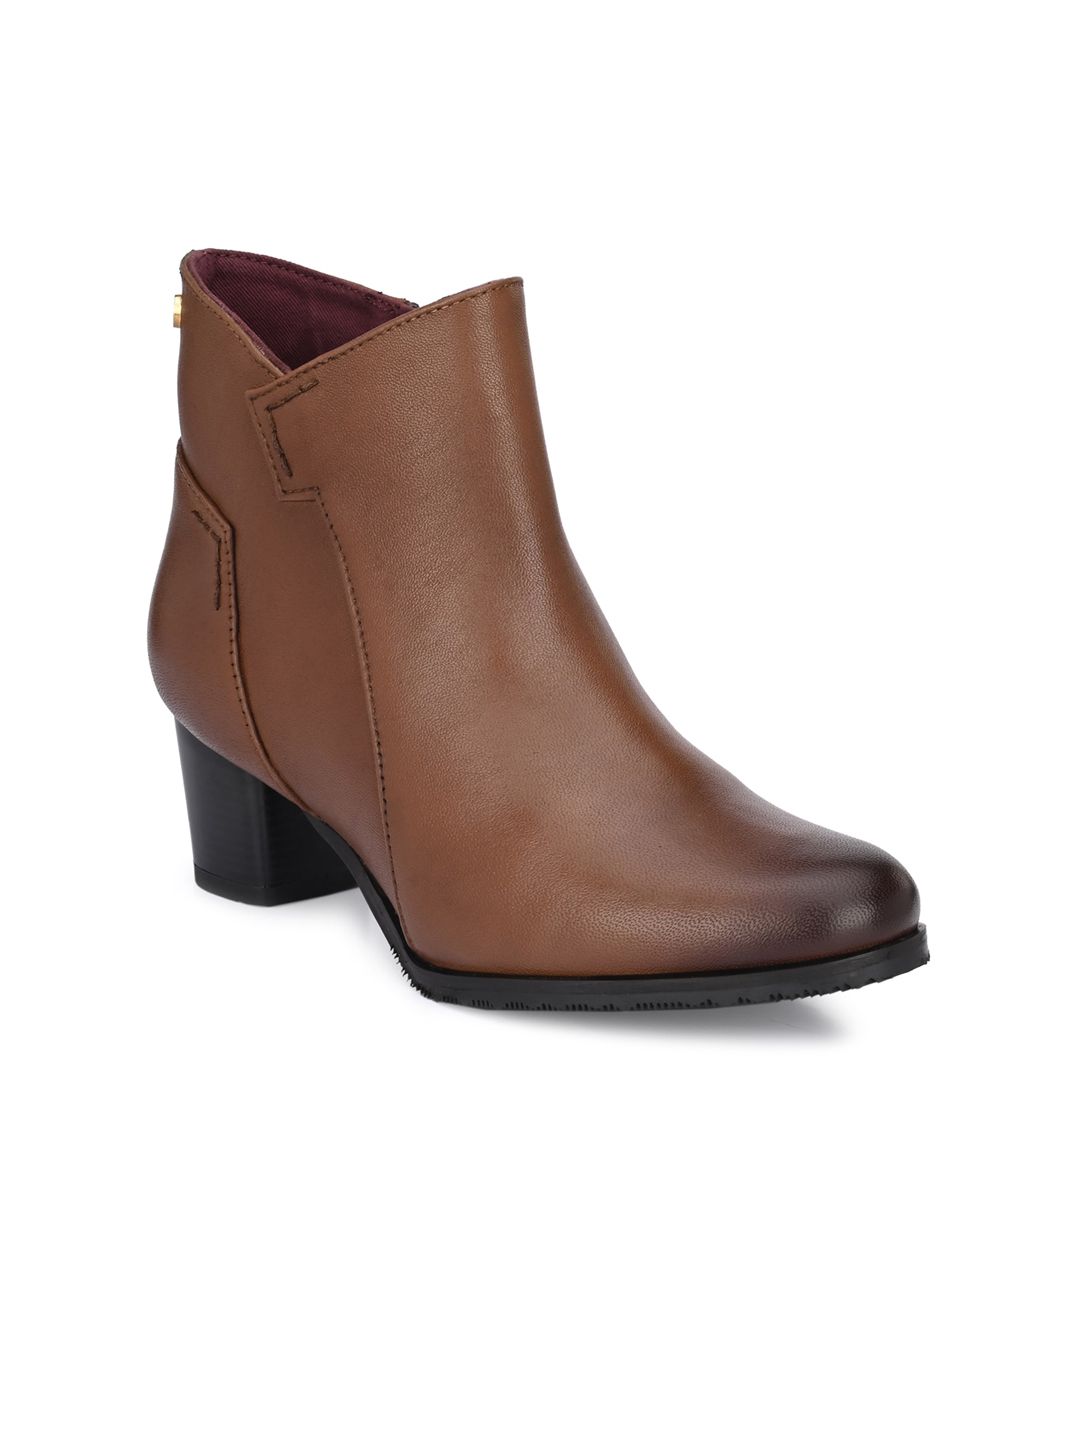 Delize Tan Brown Leather Mid-Top Block Heeled Boots Price in India